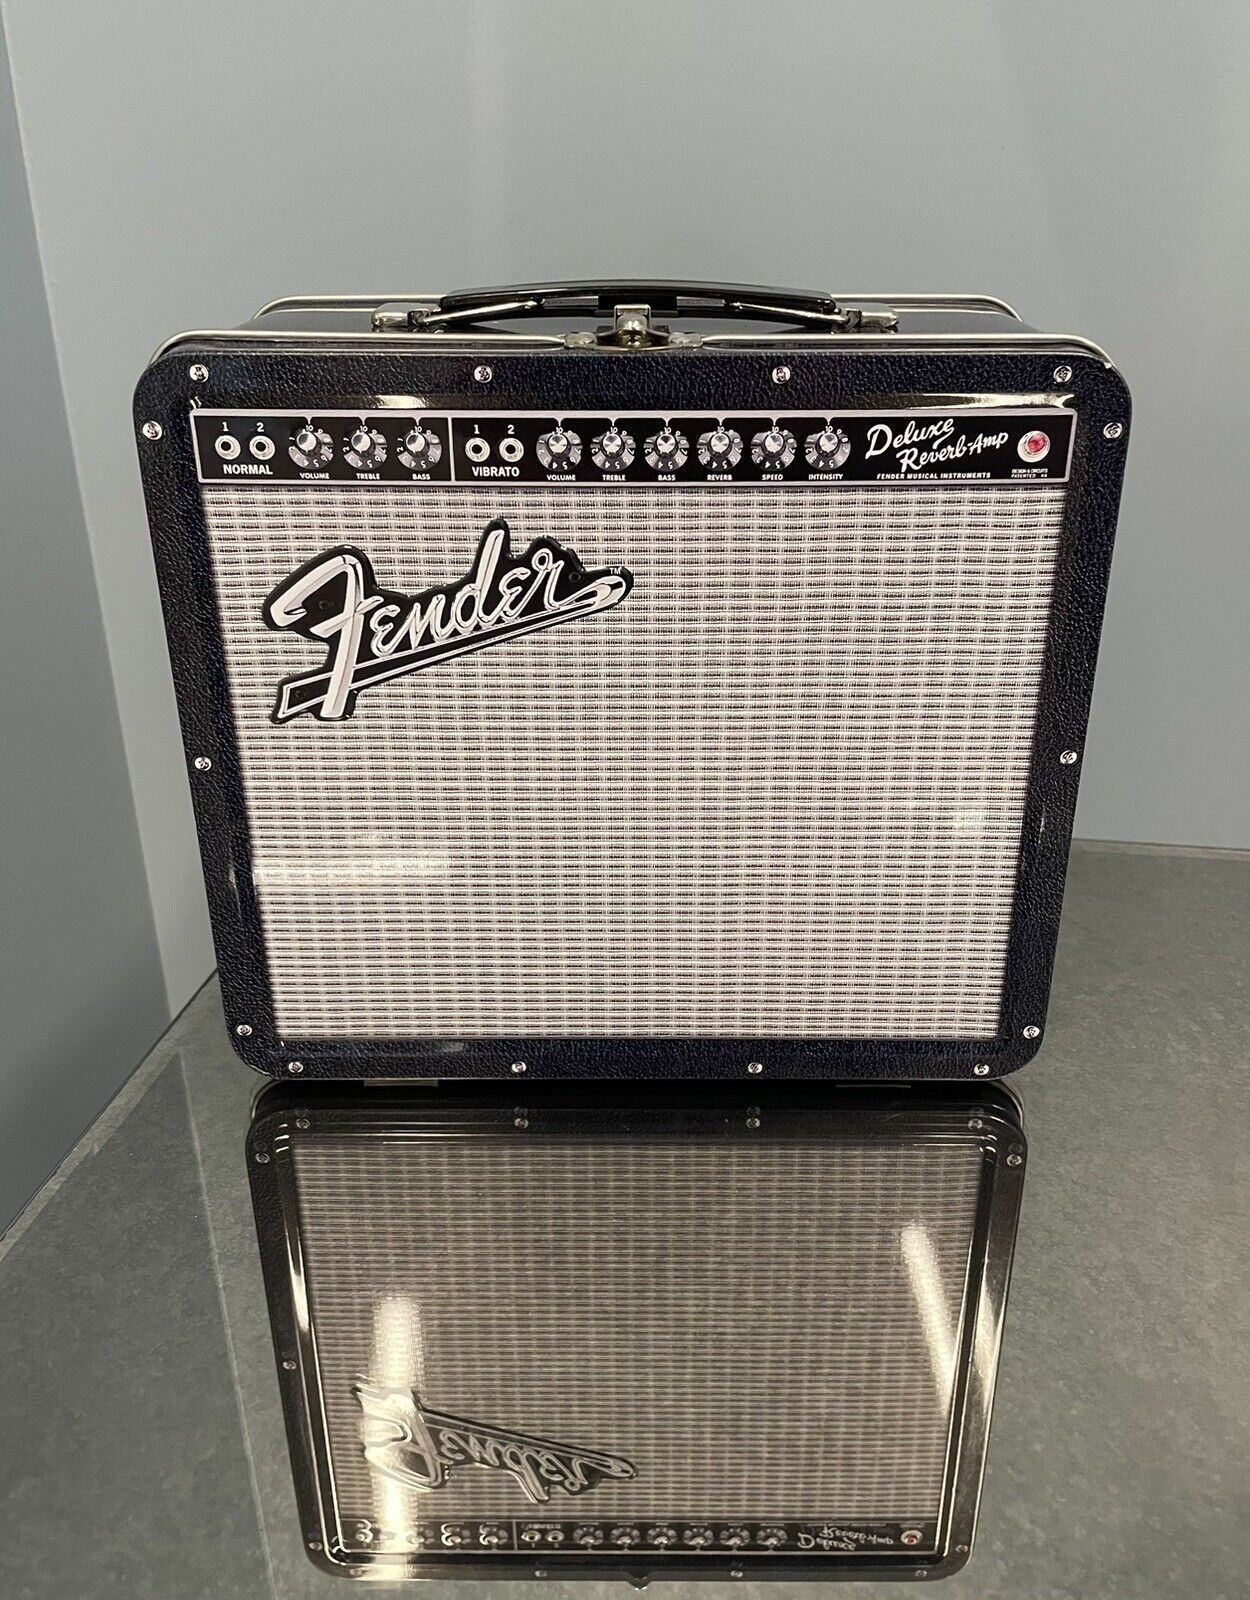 Fender Deluxe Reverb Amp Amplifier Metal Lunchbox never used